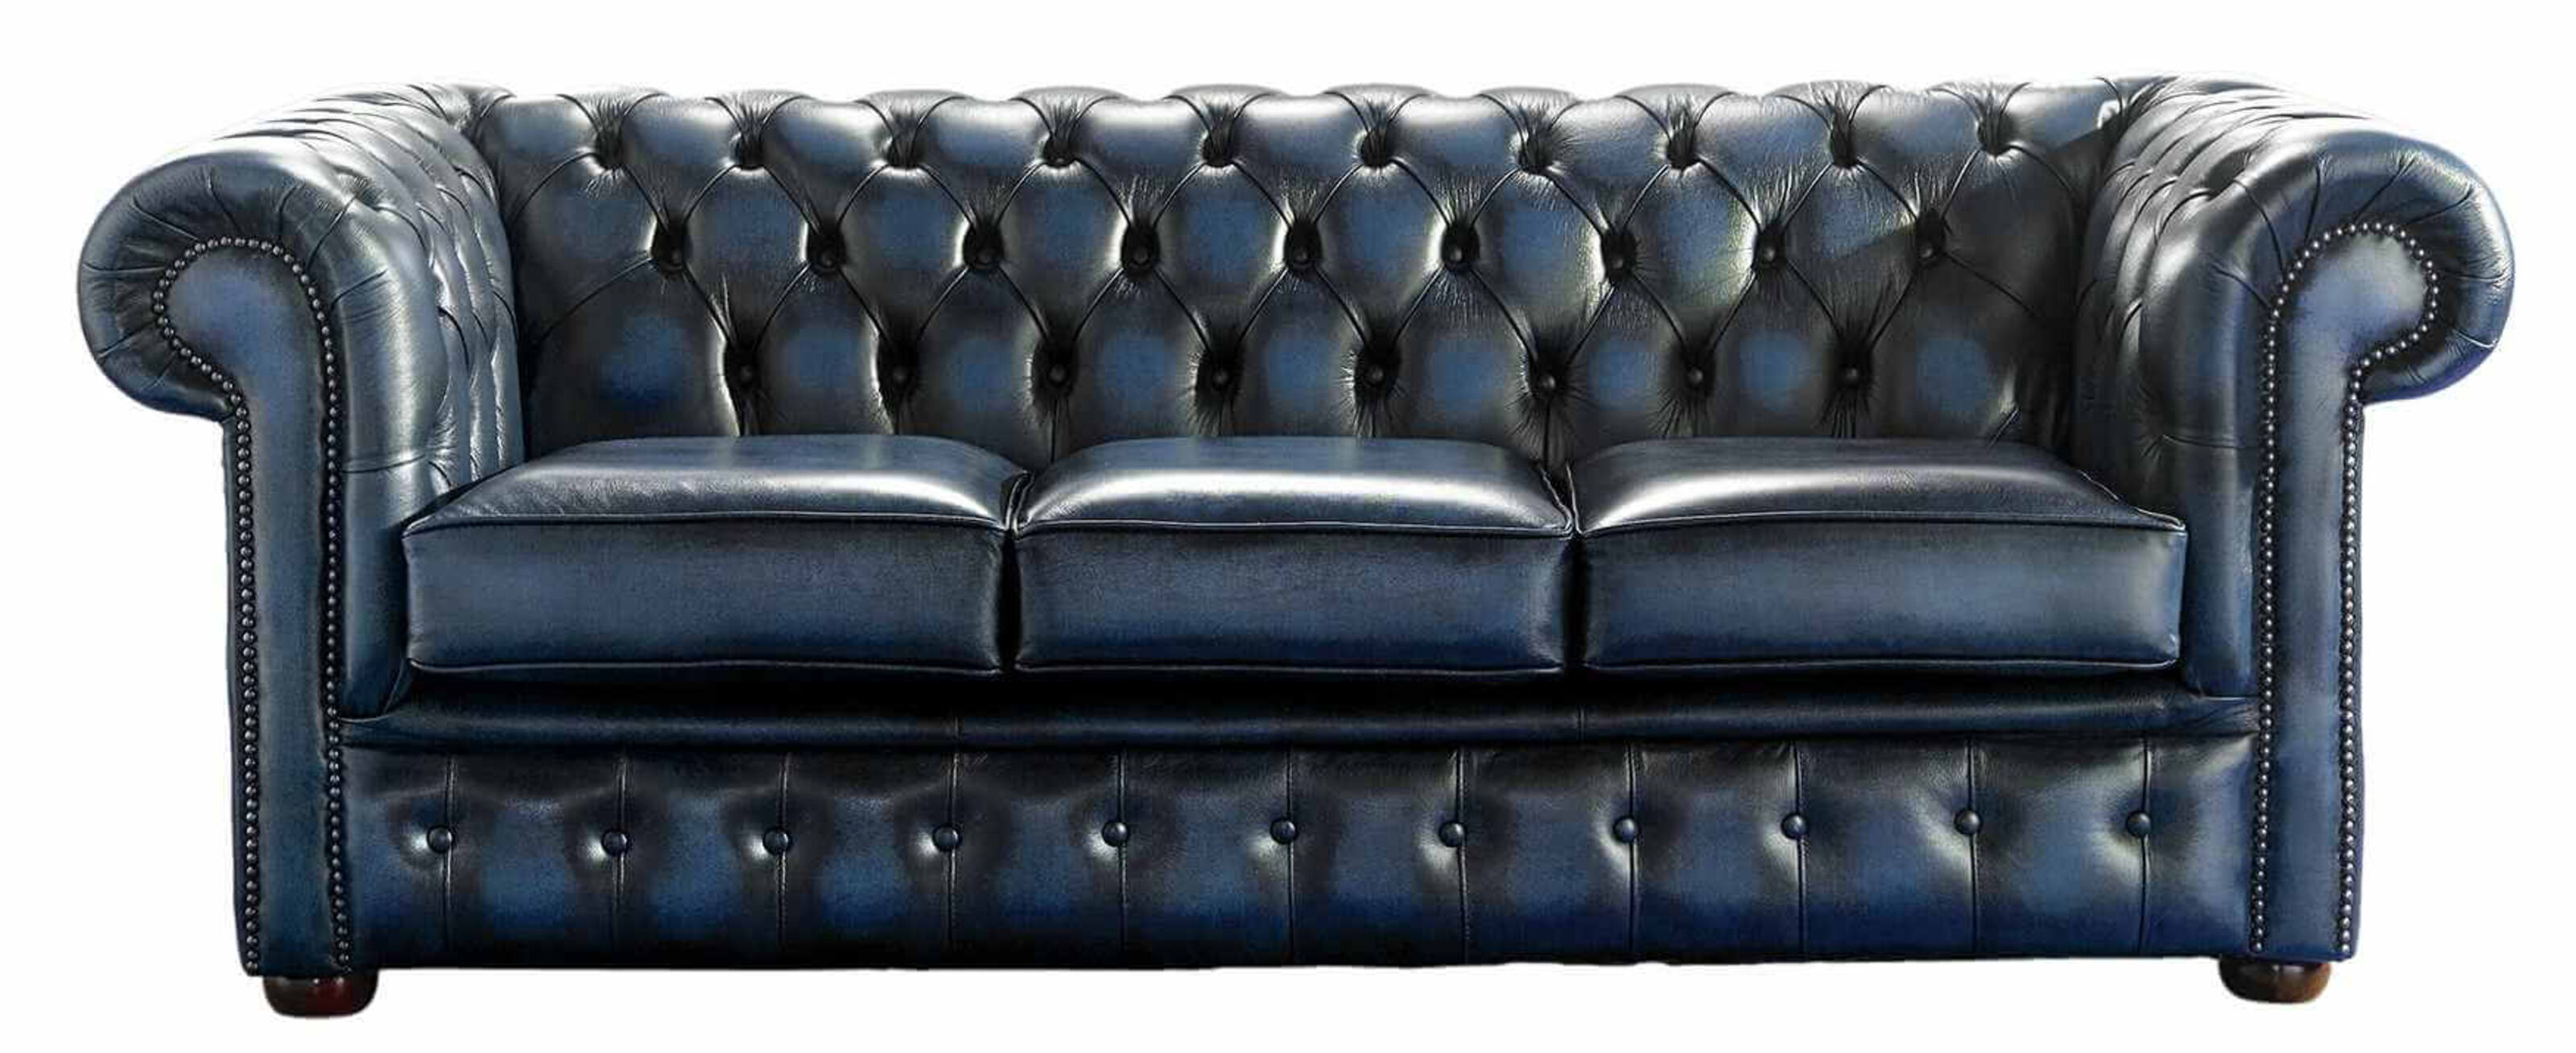 Behind the Elegance Exploring the Artisan of Chesterfield Sofas  %Post Title